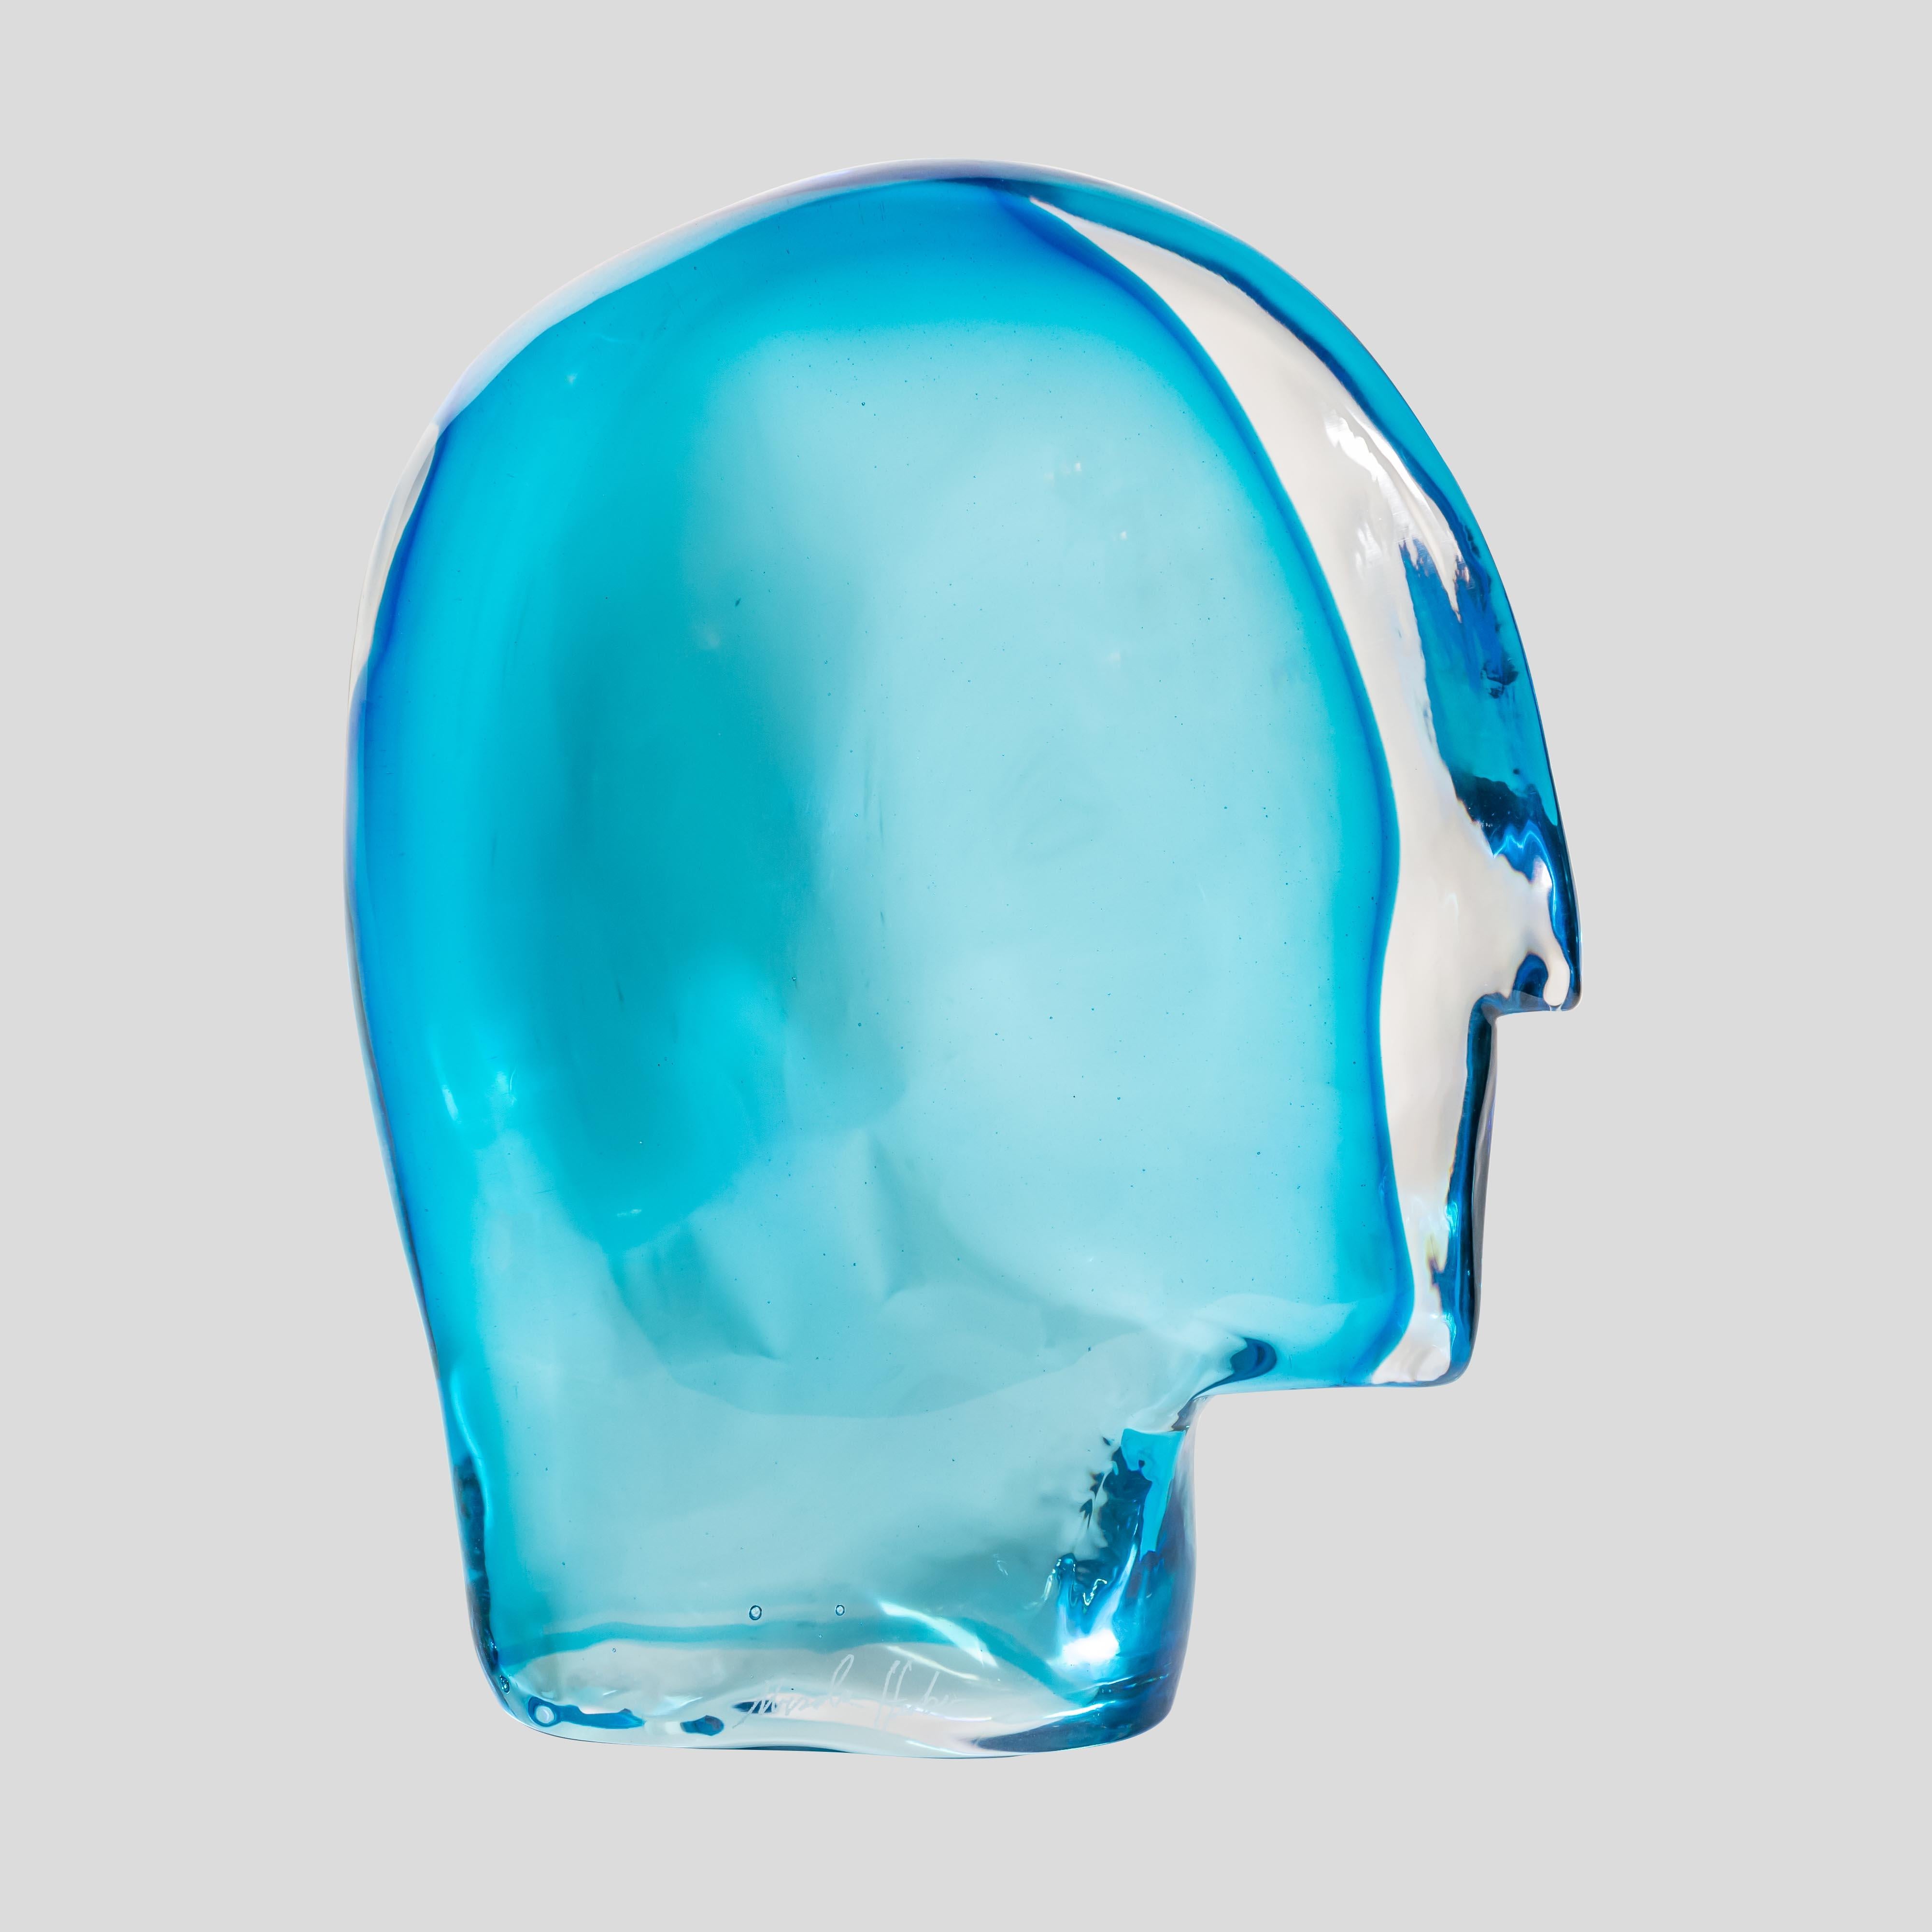 1989 Ego Art Glass Sculpture Light Blue Murano Glass by Artist Ursula Huber In Excellent Condition For Sale In London, GB